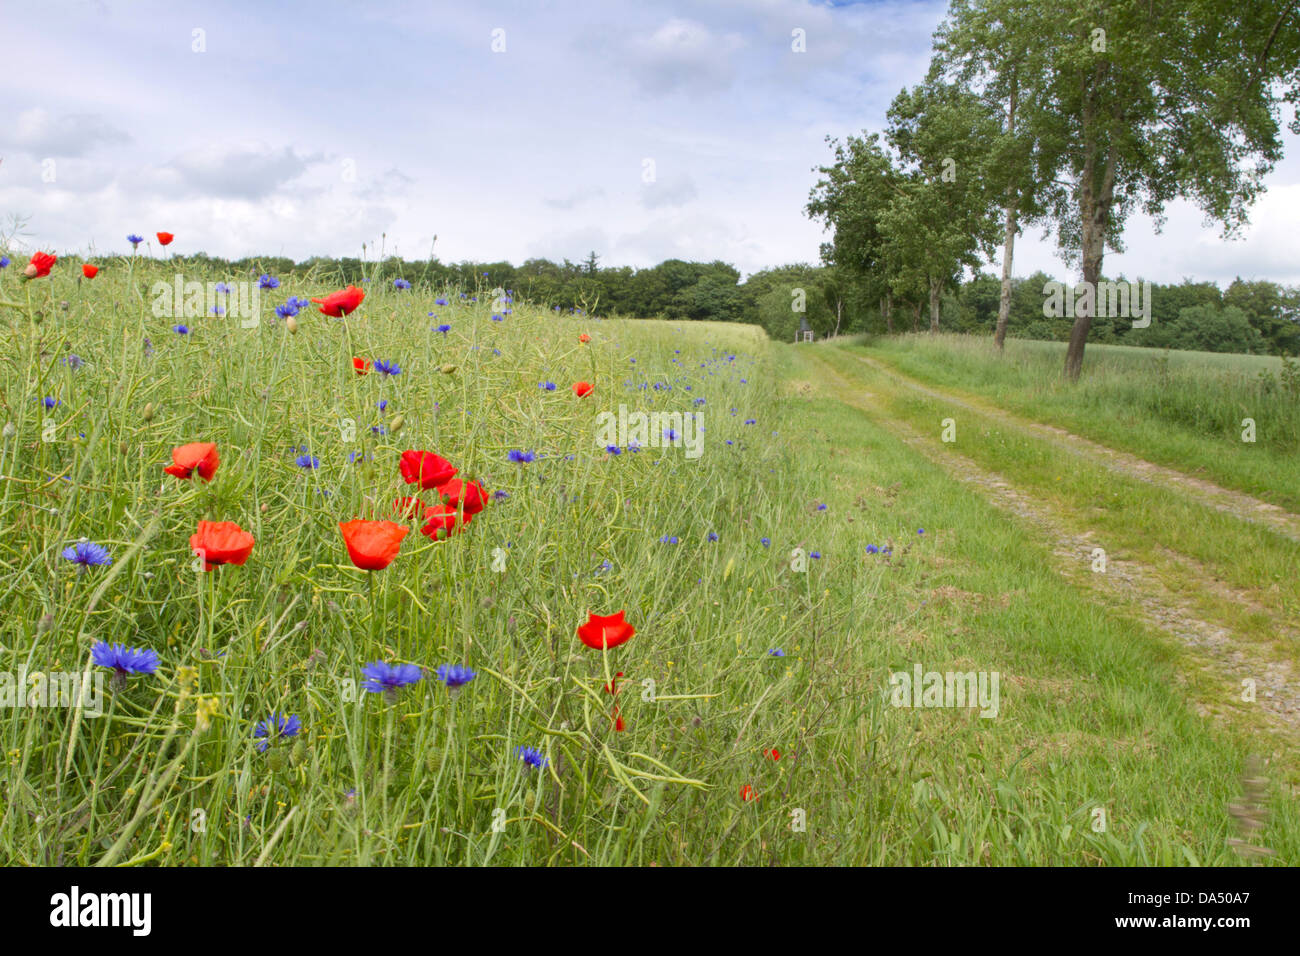 Poppies and cornflowers bring a sense of colour a field of barley as an informal avenue of trees leads the eye to the woods Stock Photo